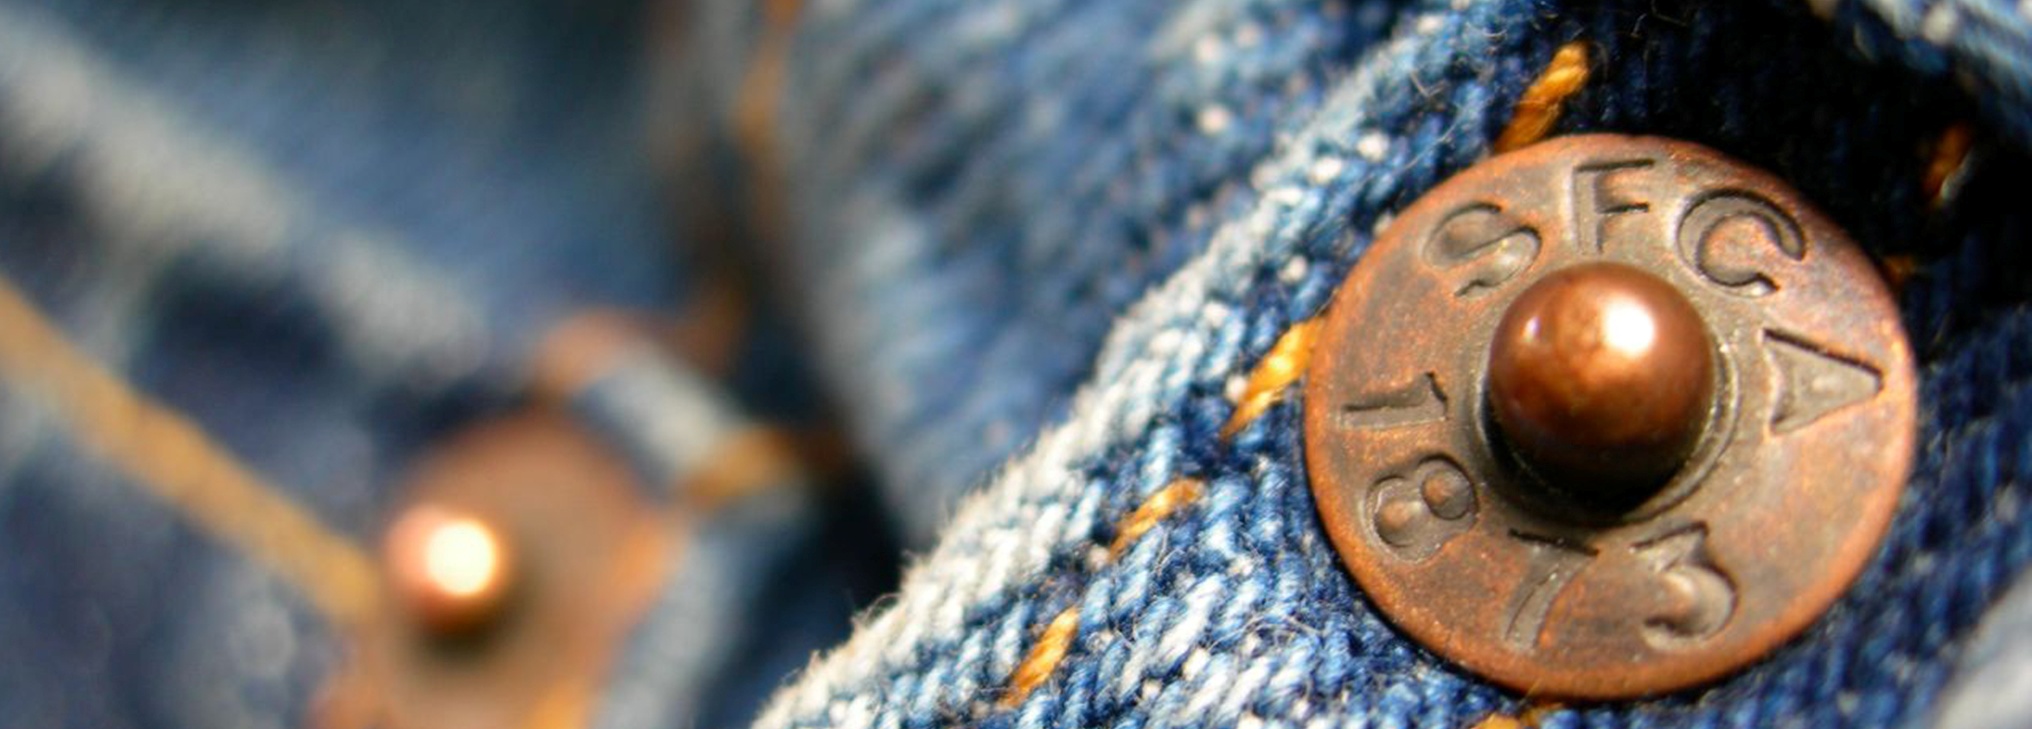 Jeans Rivets Featured Image